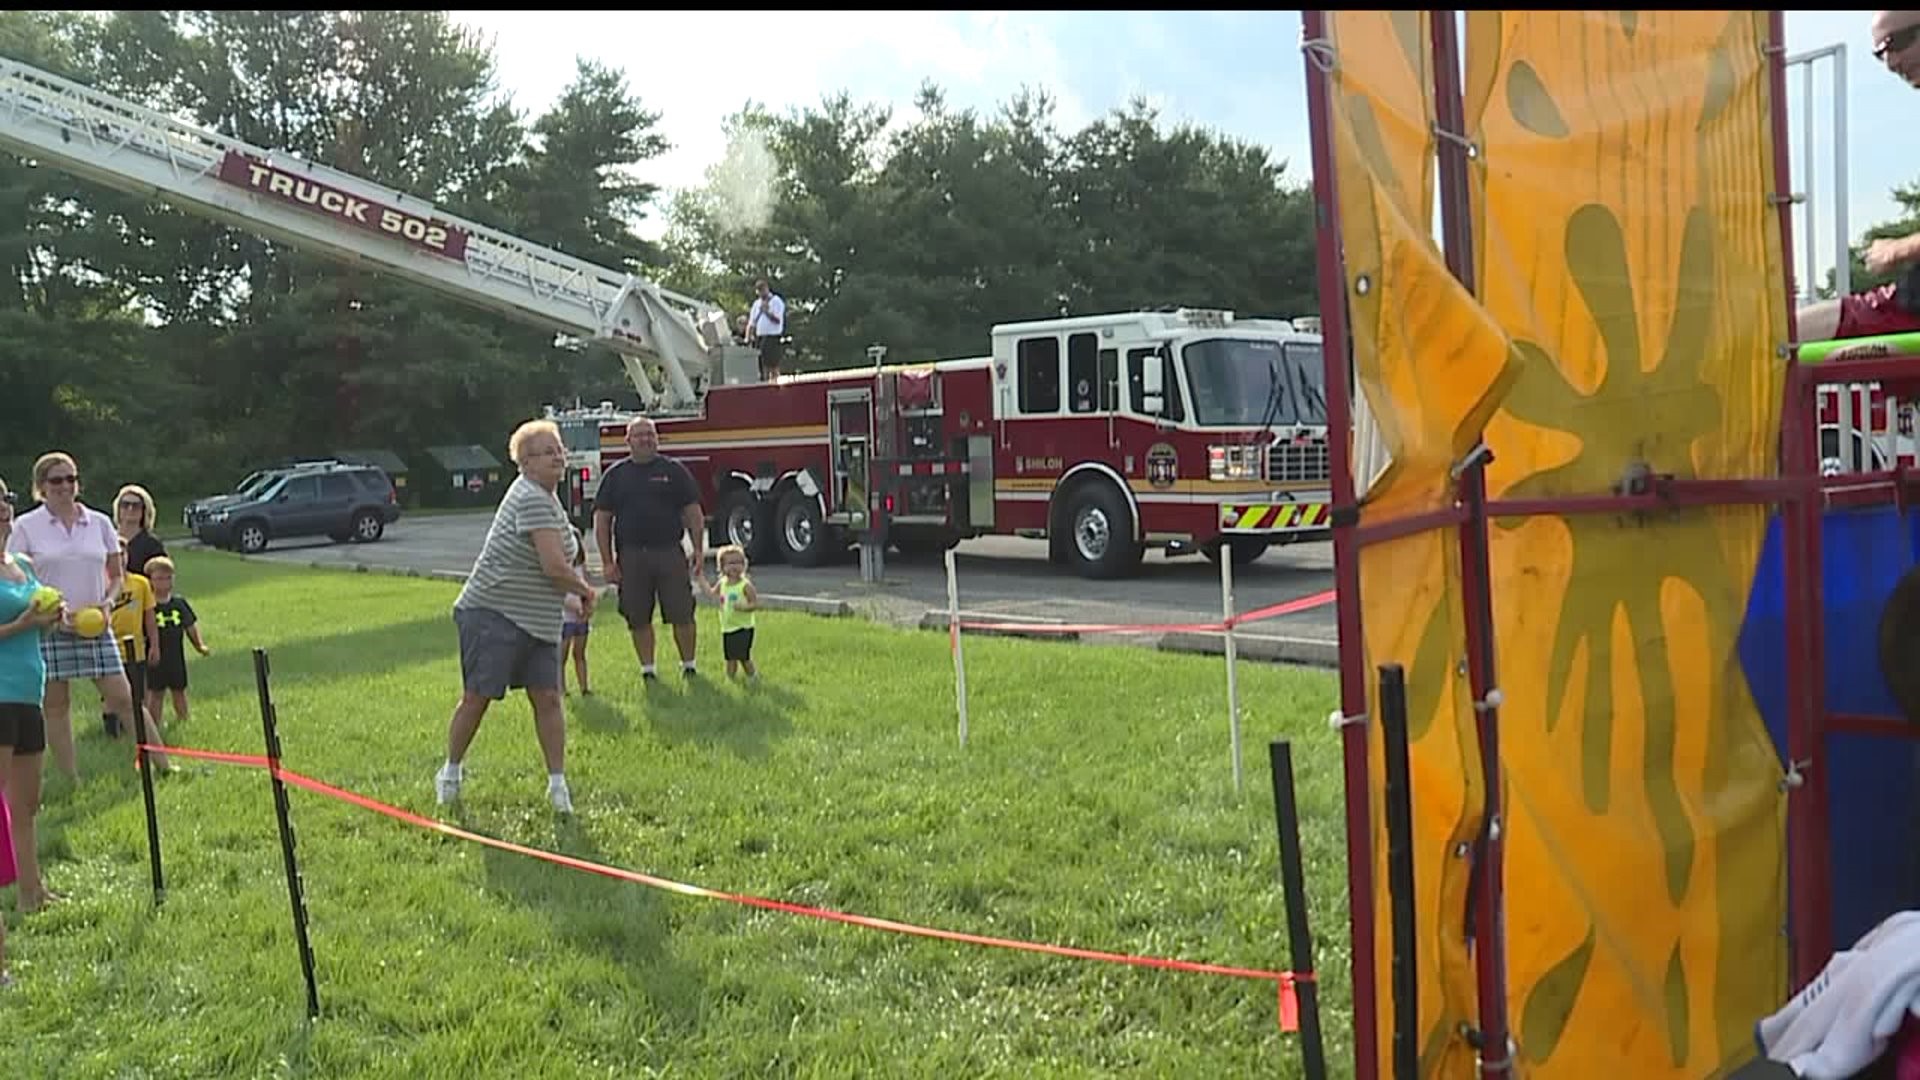 West Manchester Twp National Night Out